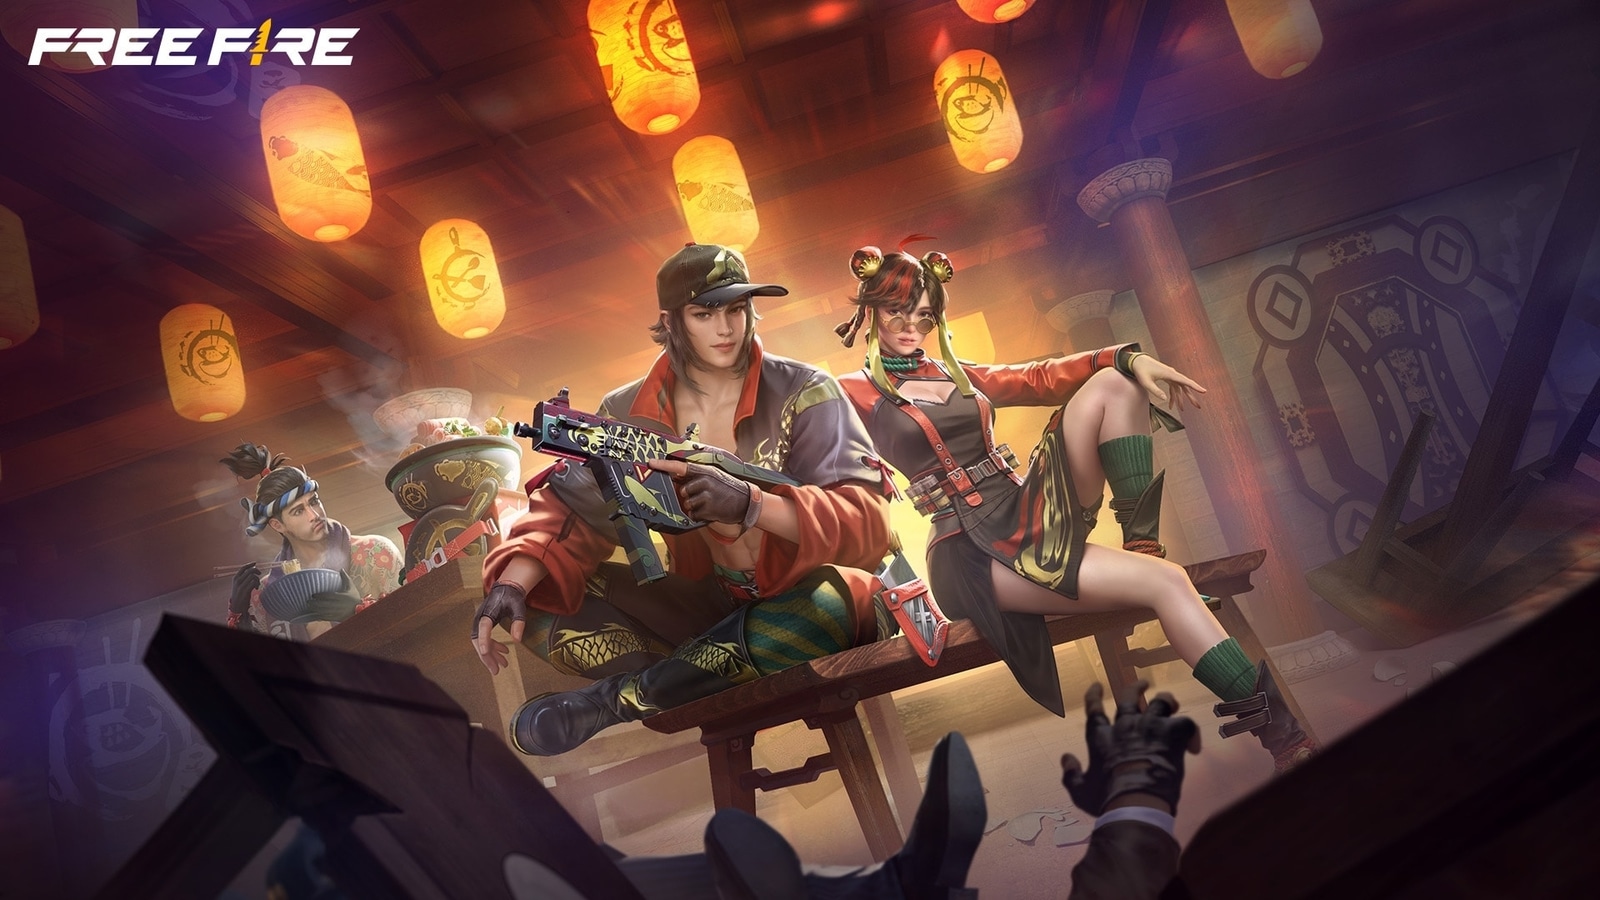 Garena Free Fire Redeem Codes for November 4: Get exciting cosmetics with the Free Fire Lucky Wheel event